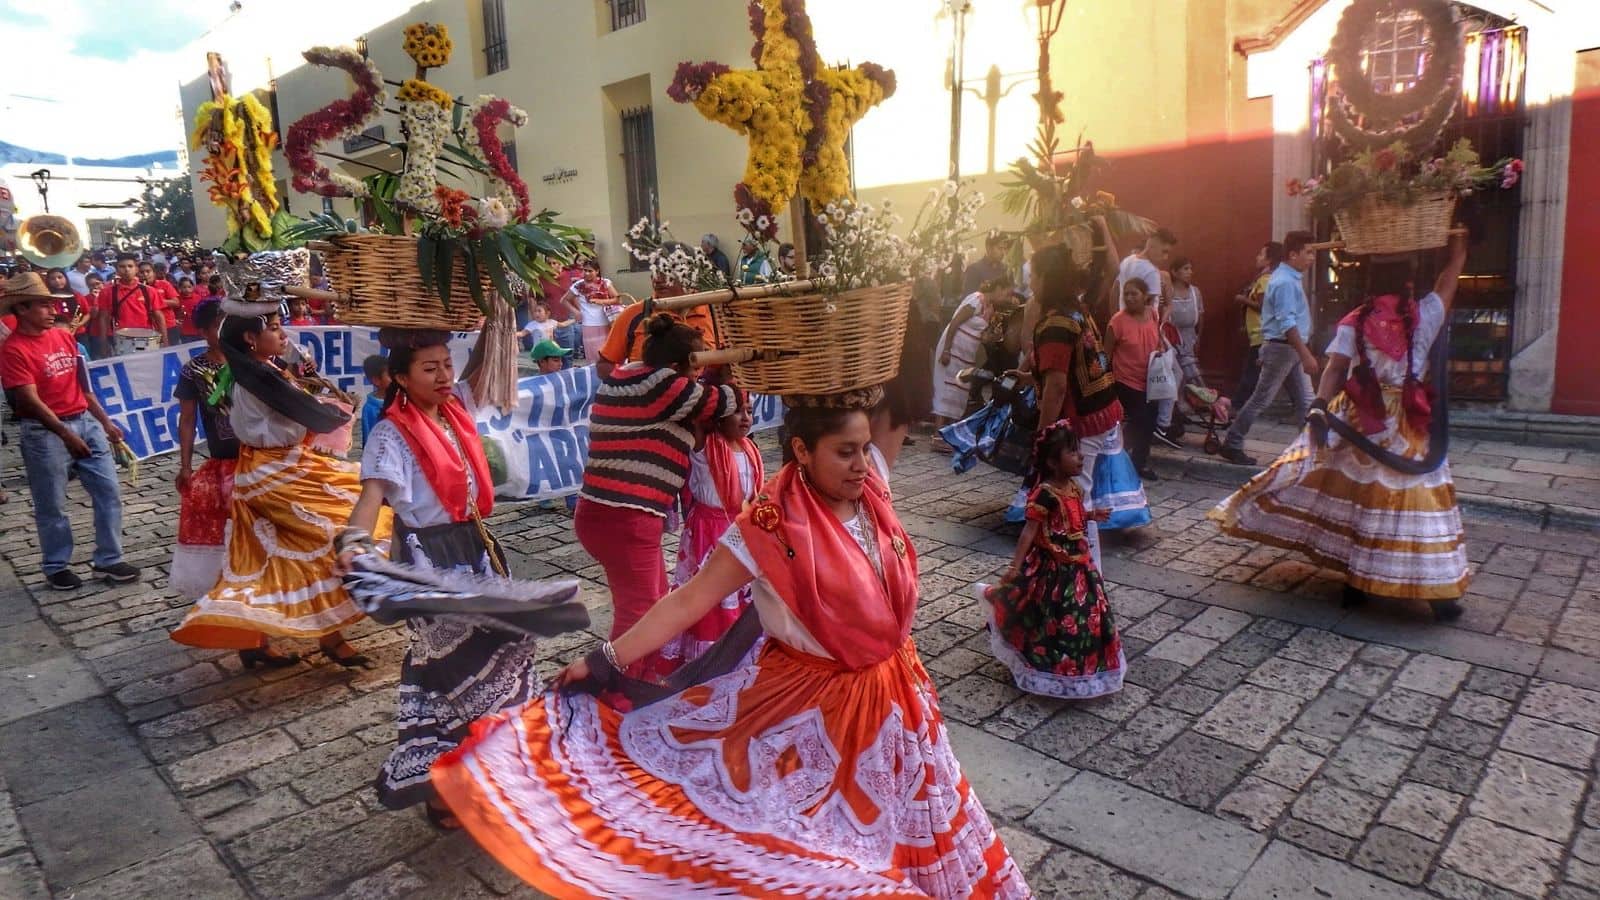 Experience Oaxaca's vibrant cultural fiesta with this guide